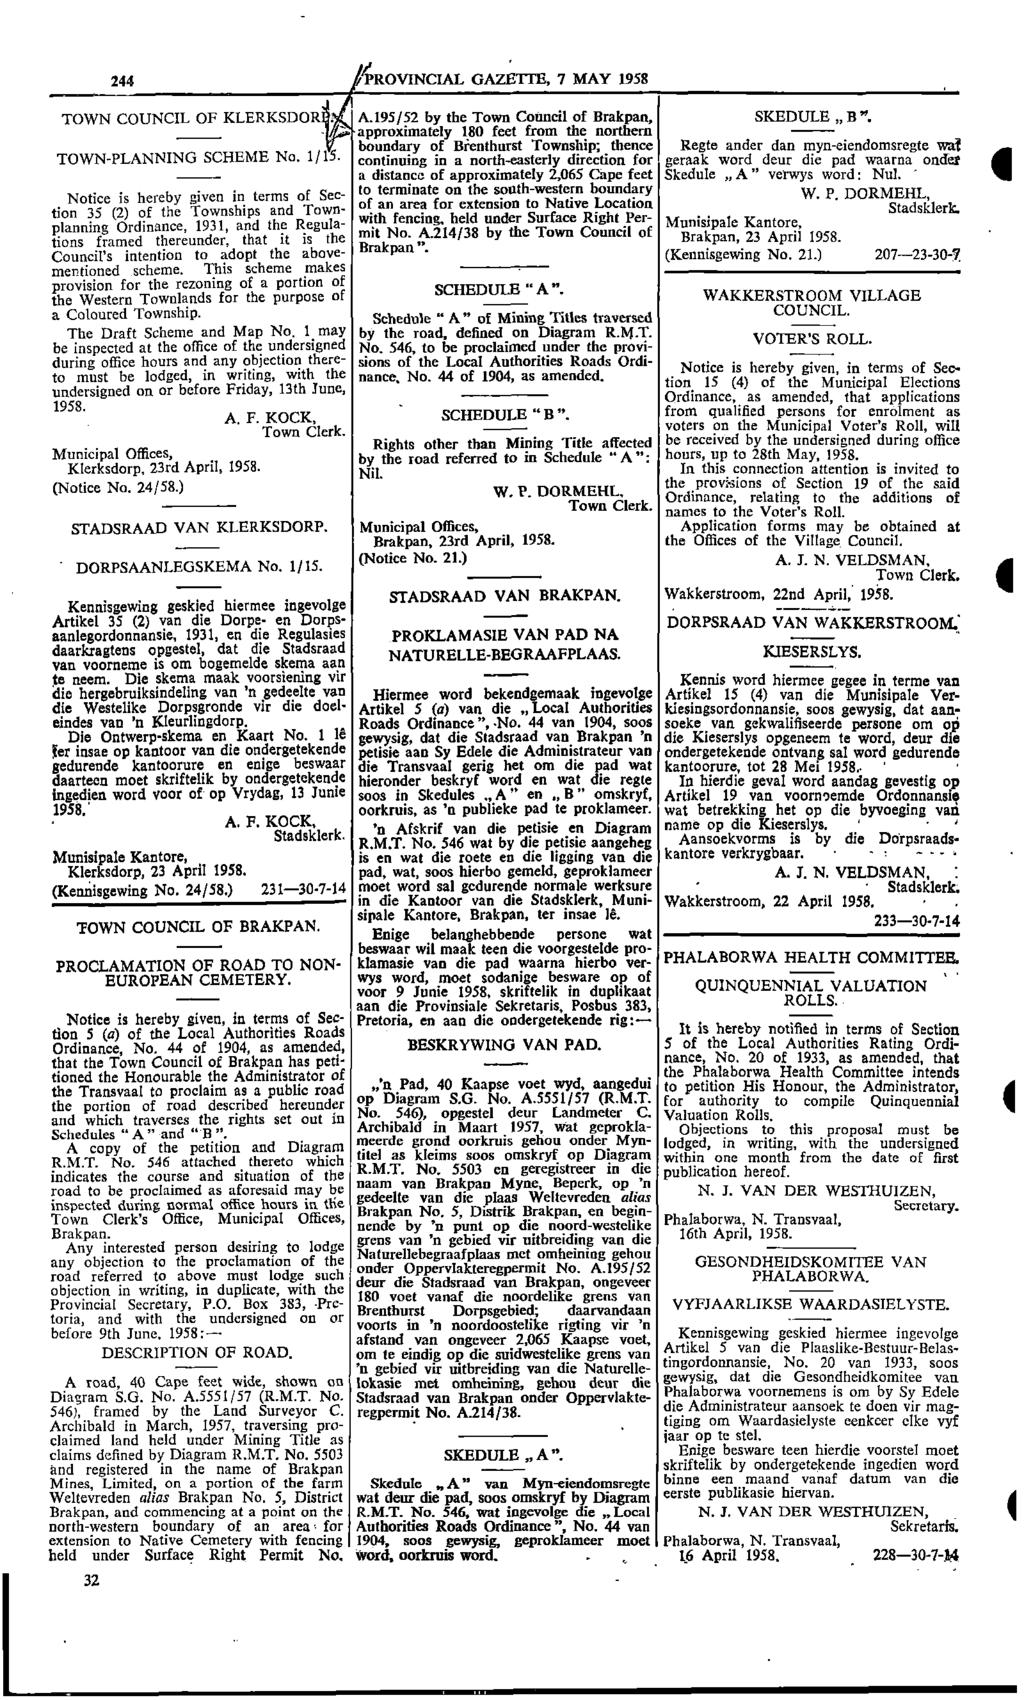 2 PROVNCAL GAZETTE 7 MAY 1958 TOWN COUNCL OF KLERKSDOR A95/52 by the Town Council of Brakpan SKEDULE B" approximately 180 feet from the northern tfr boundary of Brenthurst Township; thence Regte